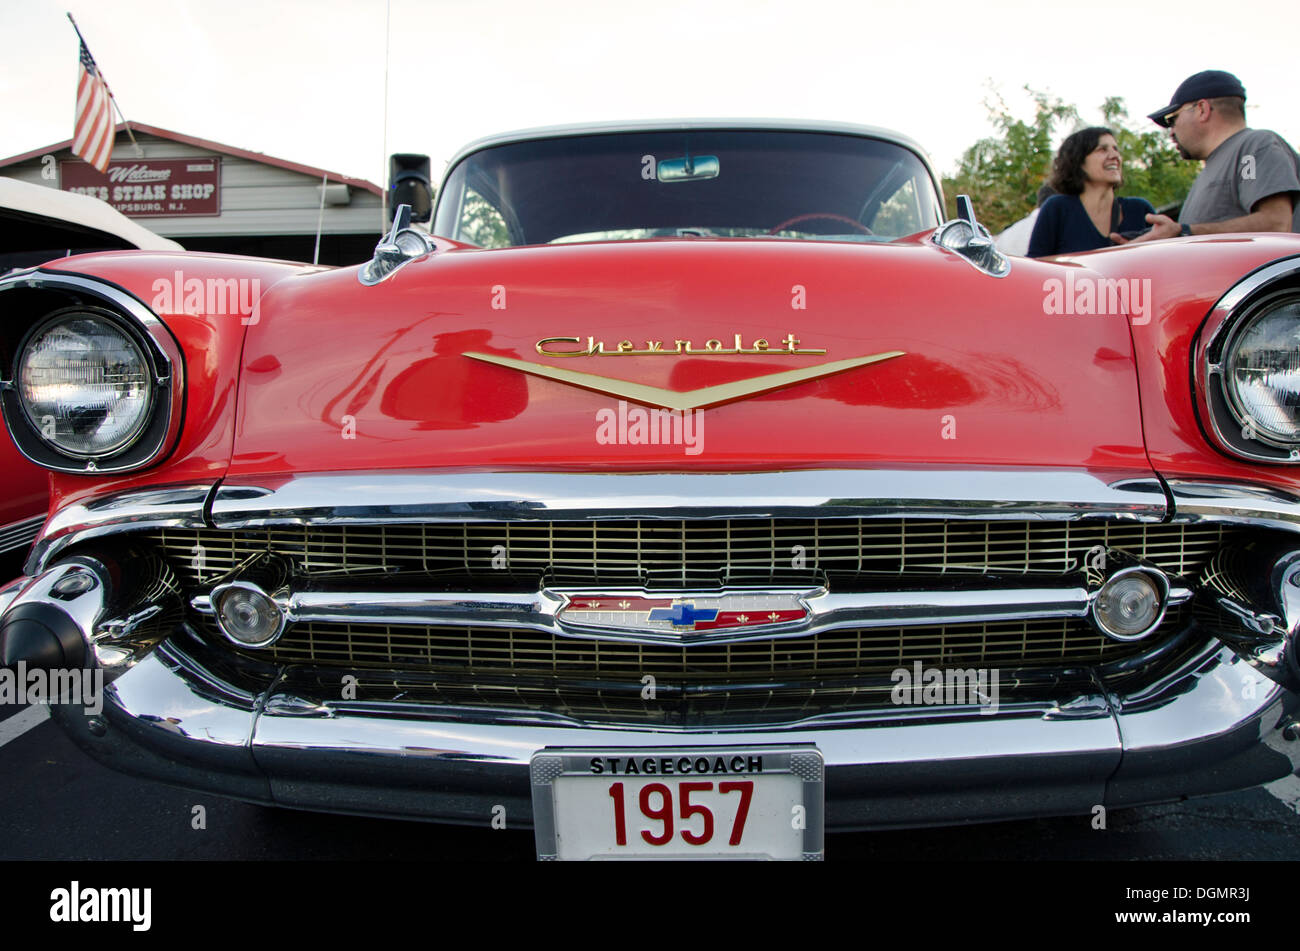 Front of a Chevrolet Belair 1957 on display during classic american historic car show in New Jersey, USA. Stock Photo